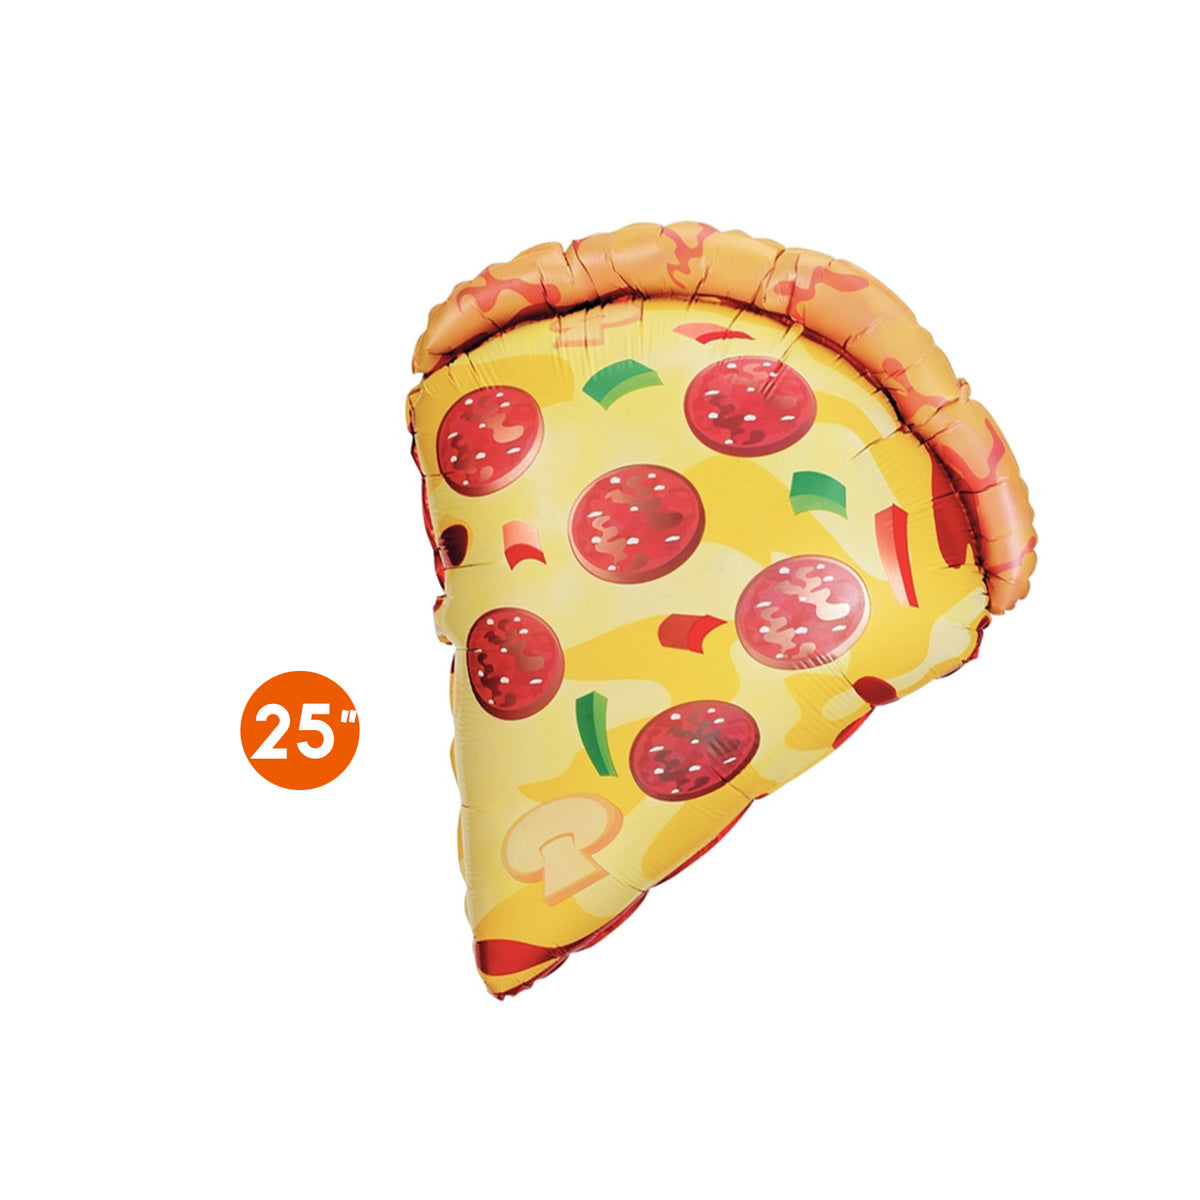 Pizza Foil Balloon 25-inch - Kids Birthday Party Balloon, Pizza theme party, Food Balloon